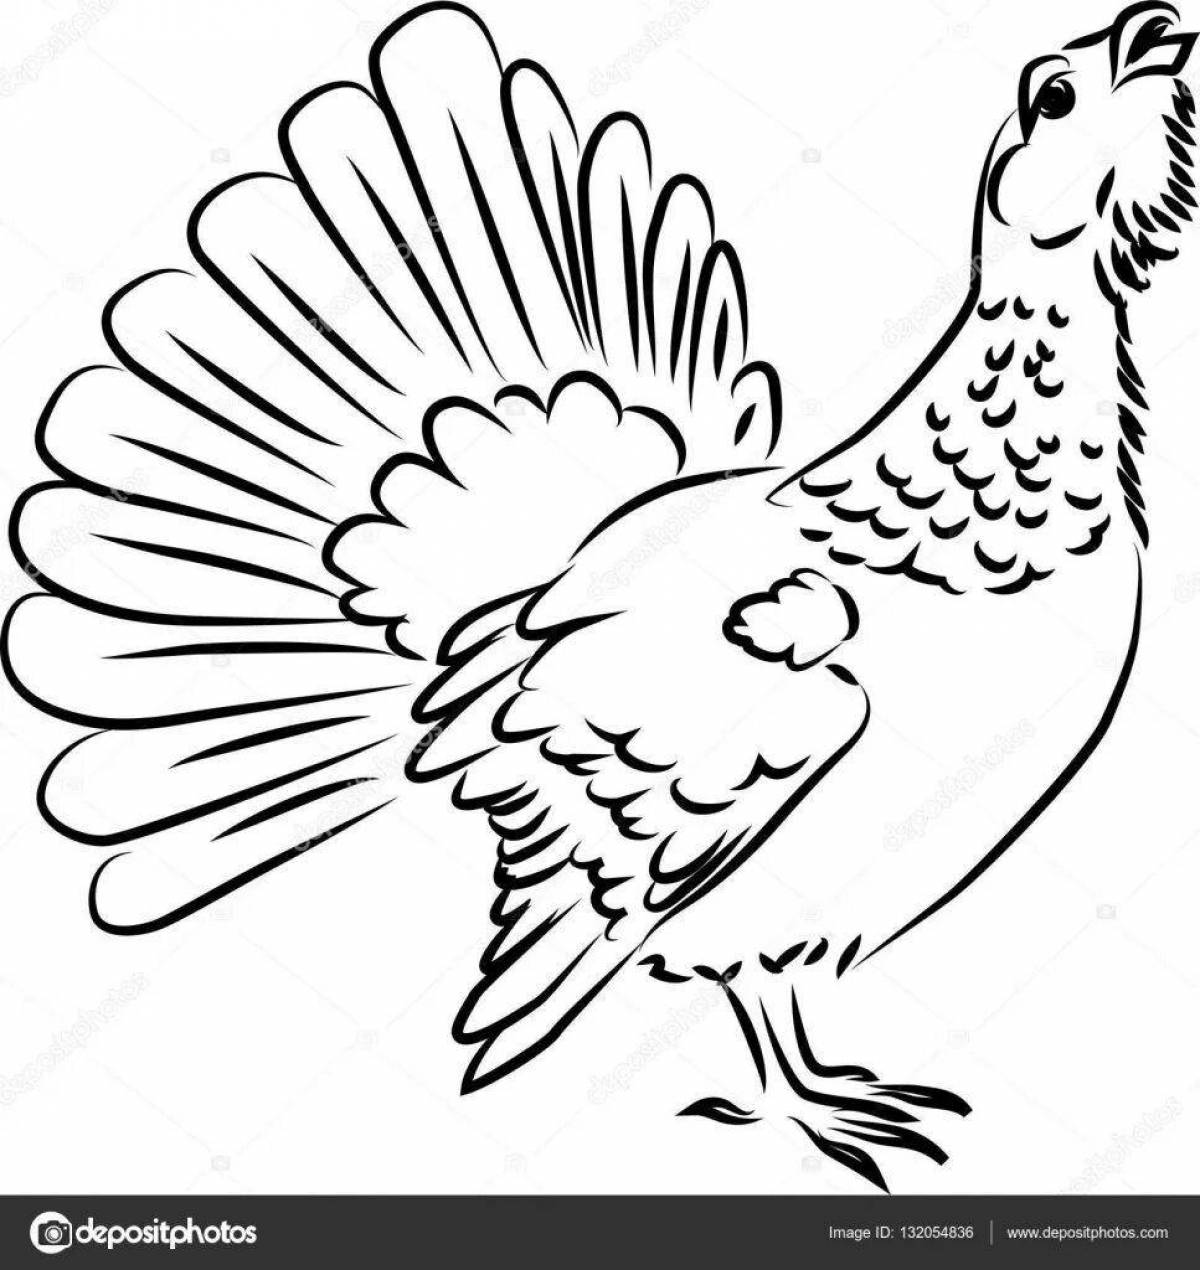 Playful black grouse coloring page for kids